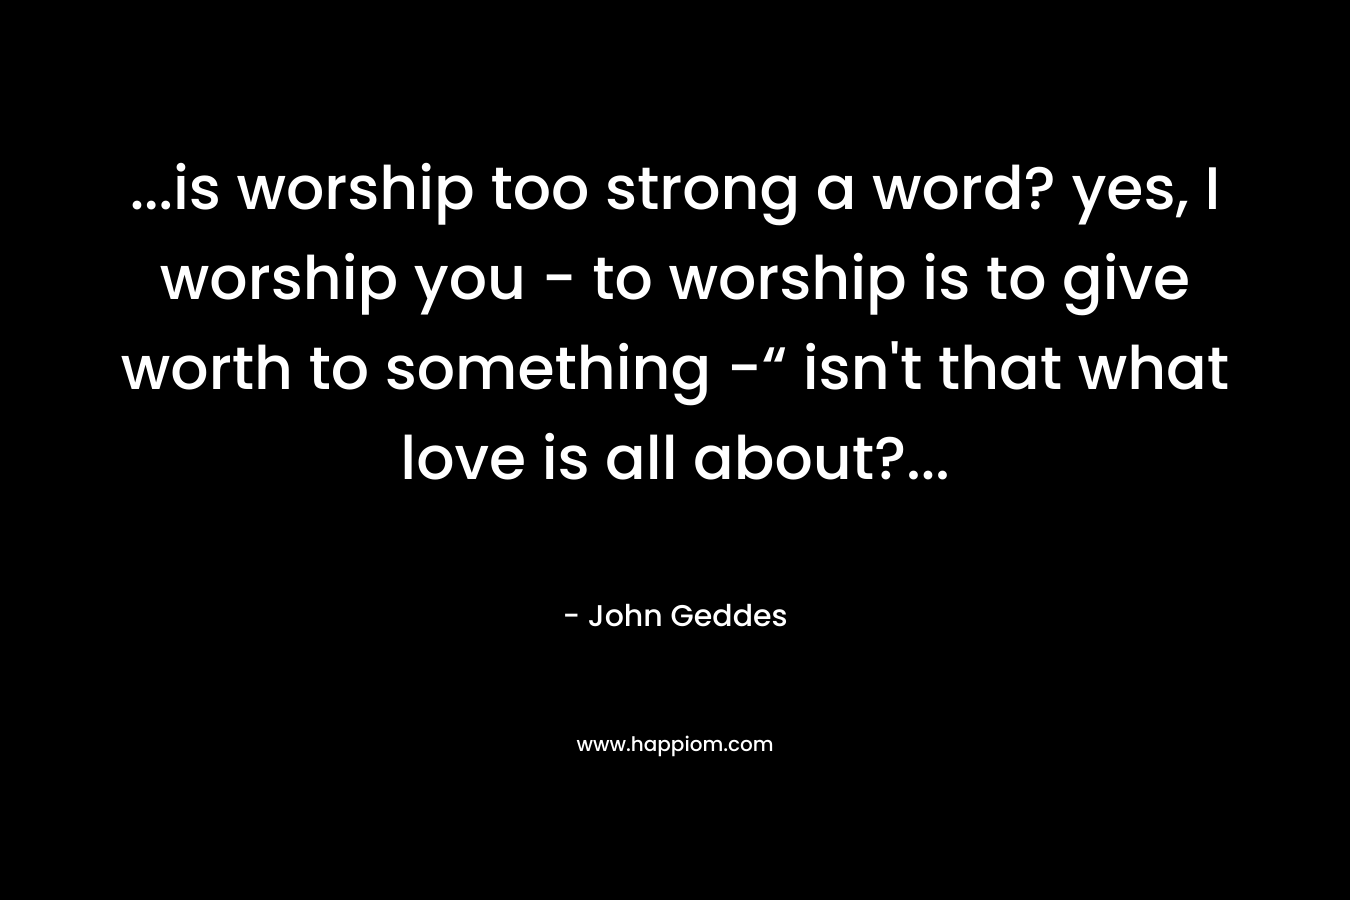 ...is worship too strong a word? yes, I worship you - to worship is to give worth to something -“ isn't that what love is all about?...